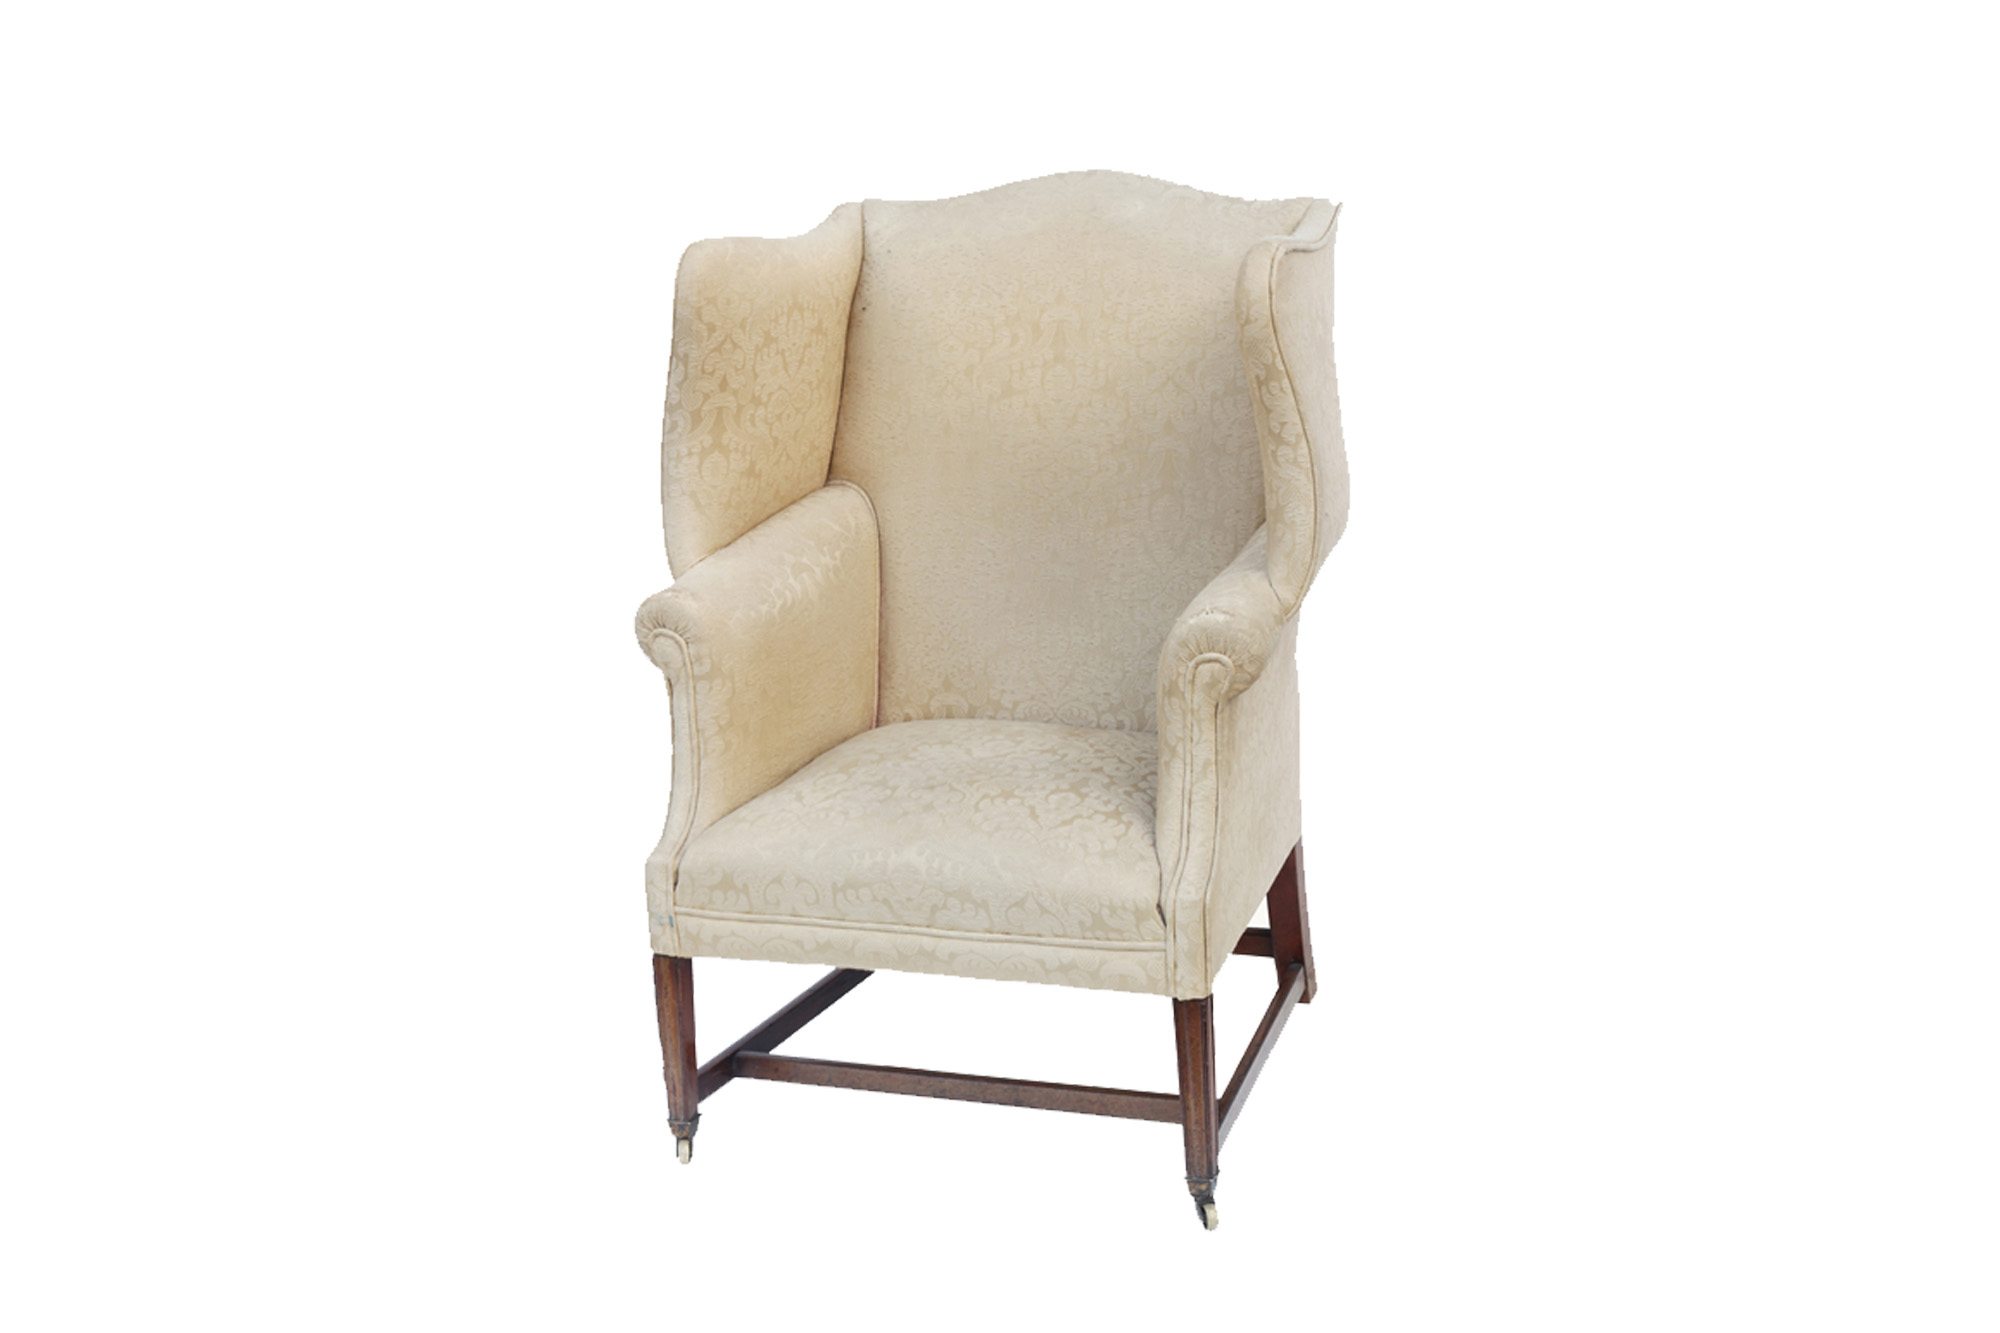 Early 19th Century Regency Wing Arm Chair